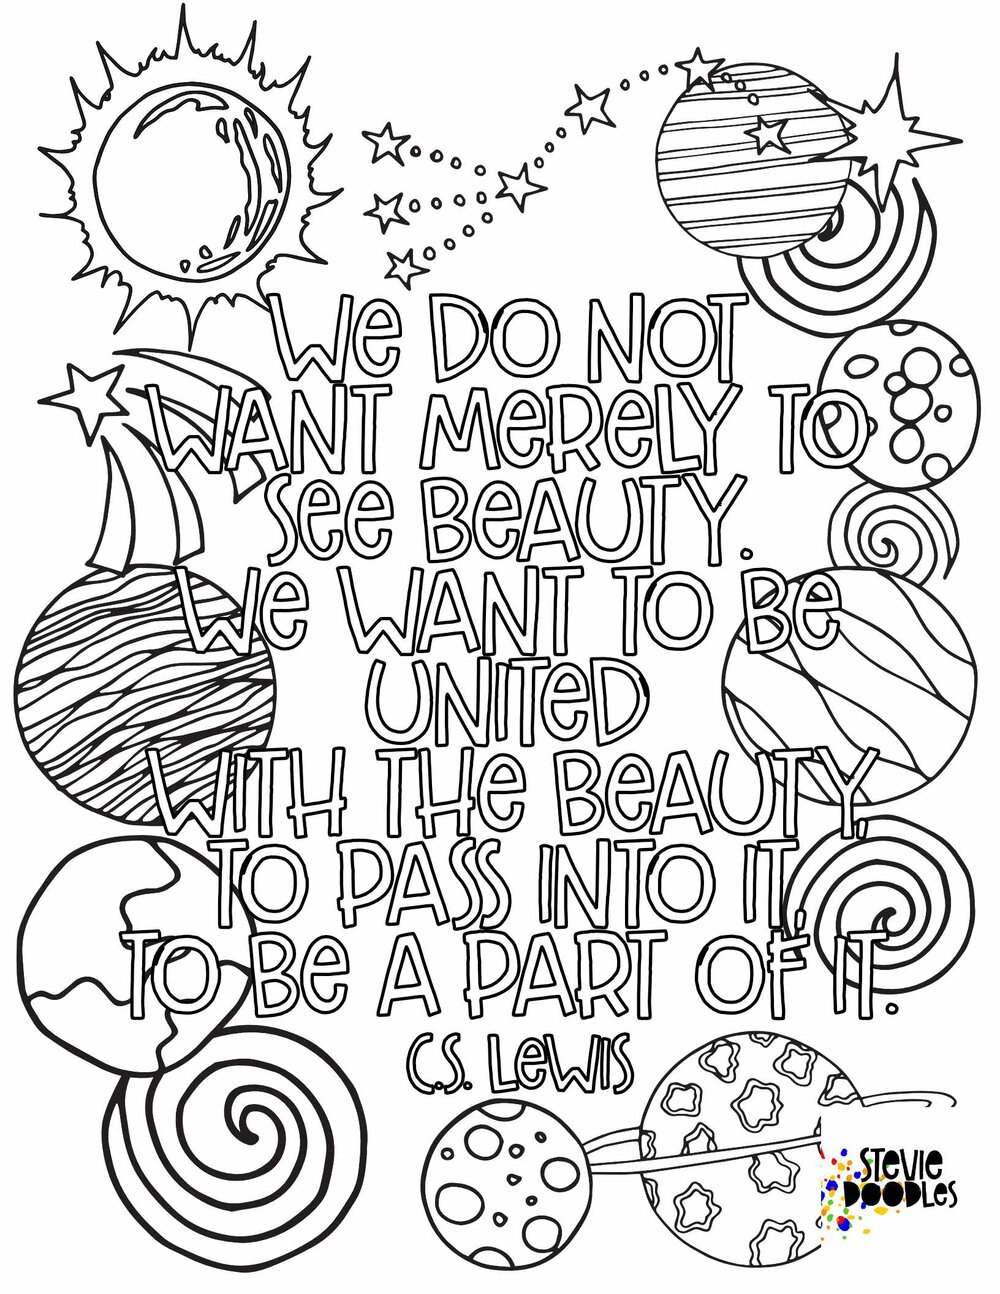 Quote coloring pages for adults â stevie doodles